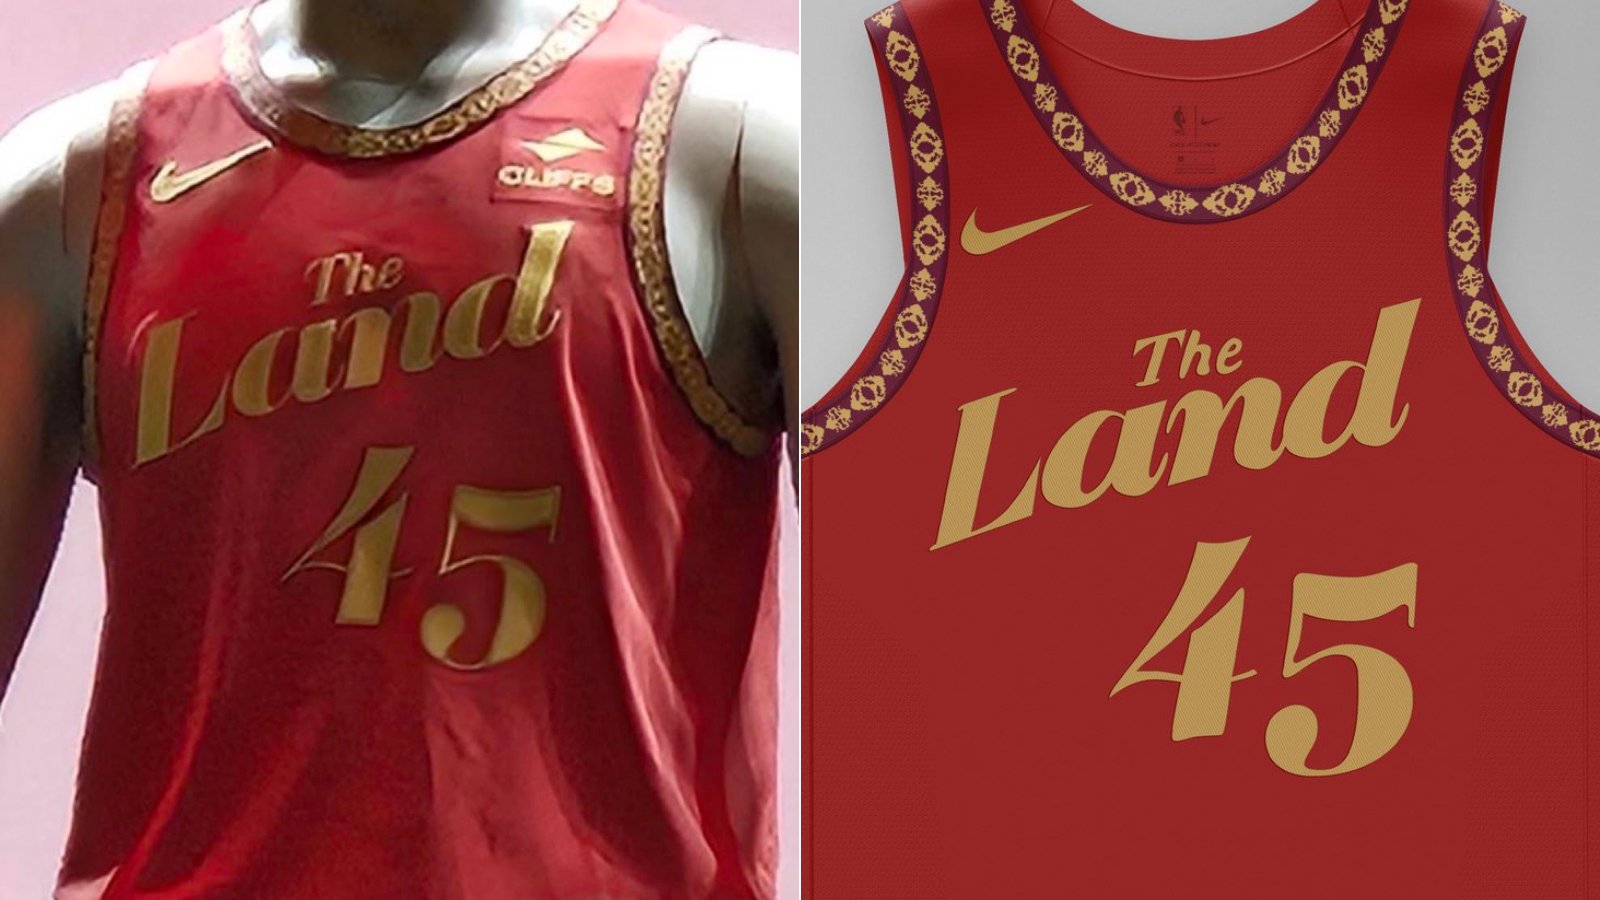 Cavaliers New City Edition Jersey Unveiling Party Goes Wrong With